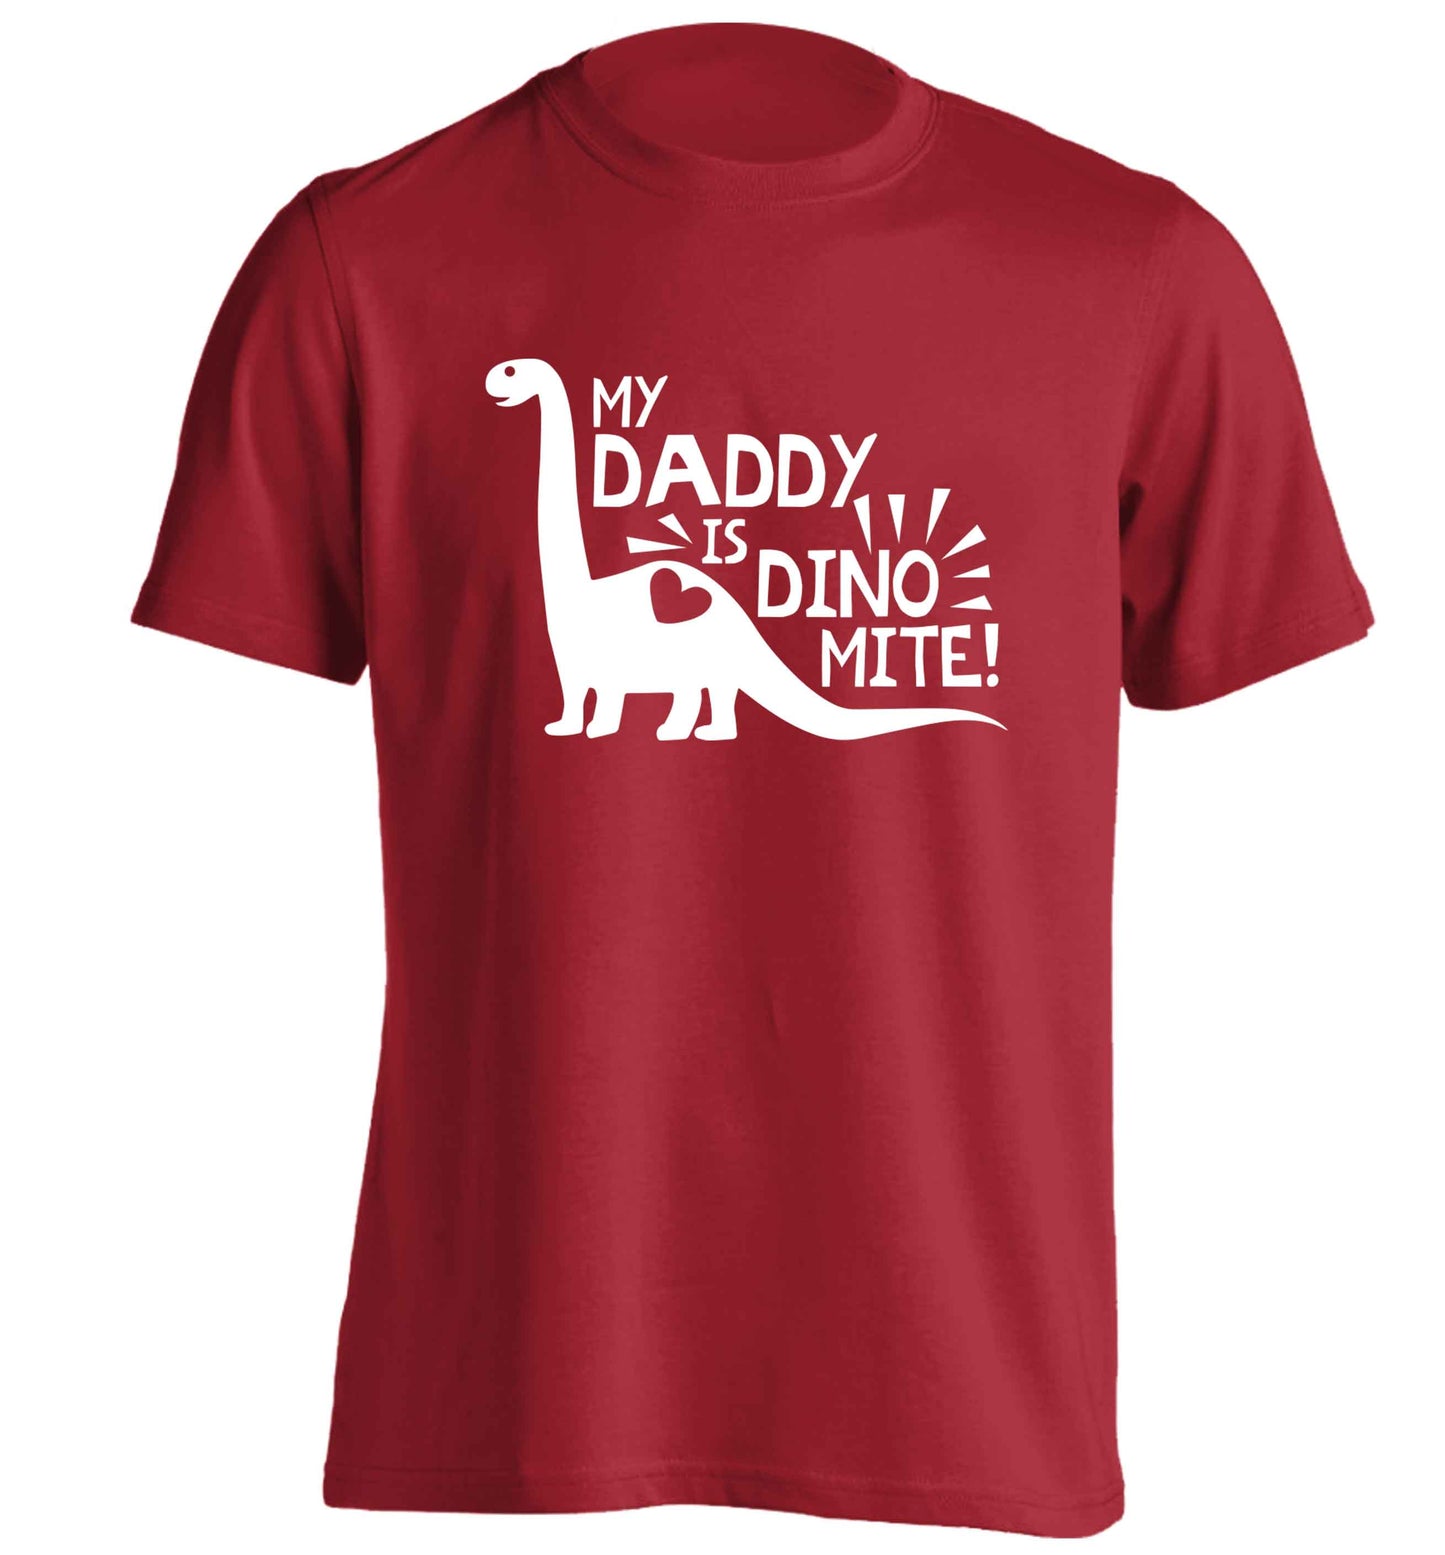 My daddy is dinomite! adults unisex red Tshirt 2XL